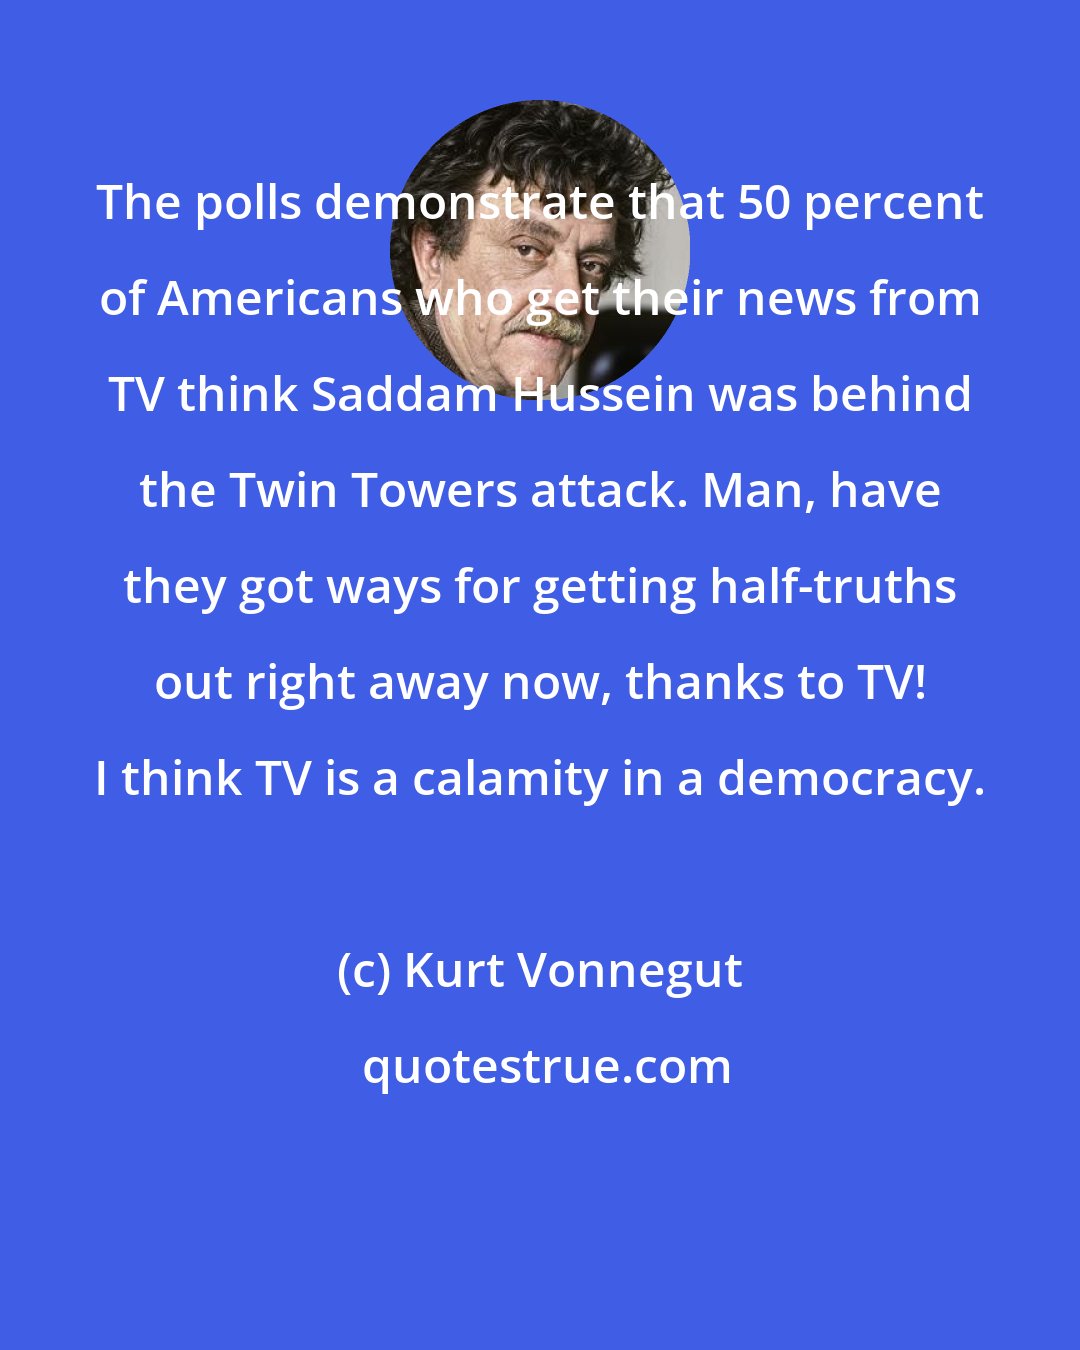 Kurt Vonnegut: The polls demonstrate that 50 percent of Americans who get their news from TV think Saddam Hussein was behind the Twin Towers attack. Man, have they got ways for getting half-truths out right away now, thanks to TV! I think TV is a calamity in a democracy.